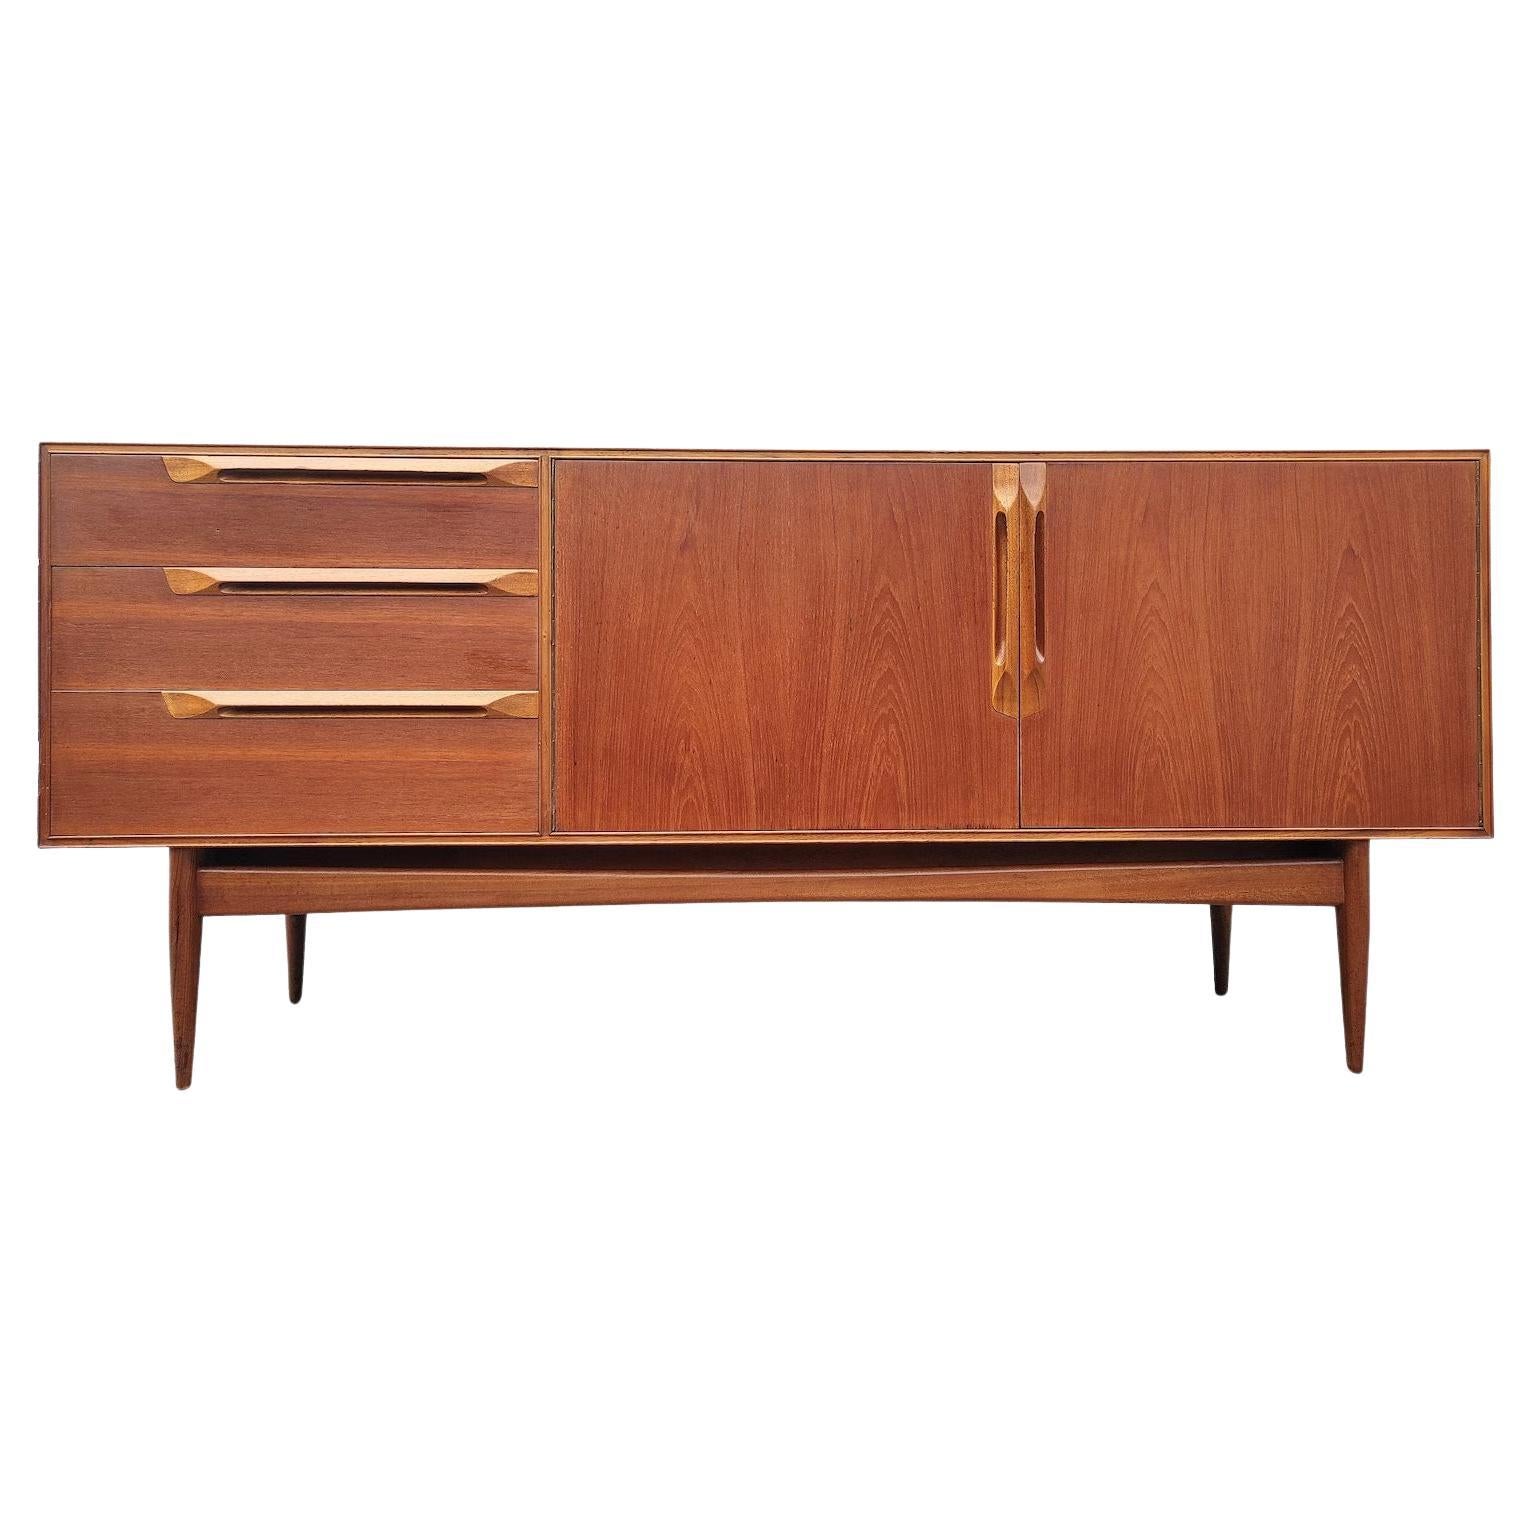 Mid Century Modern Danish Inspired Teak Credenza by McIntosh 

Above average vintage condition and structurally sound. Has some expected slight finish wear and scratching. Edges have some dings and small chips. Please see listing pictures. Outdoor